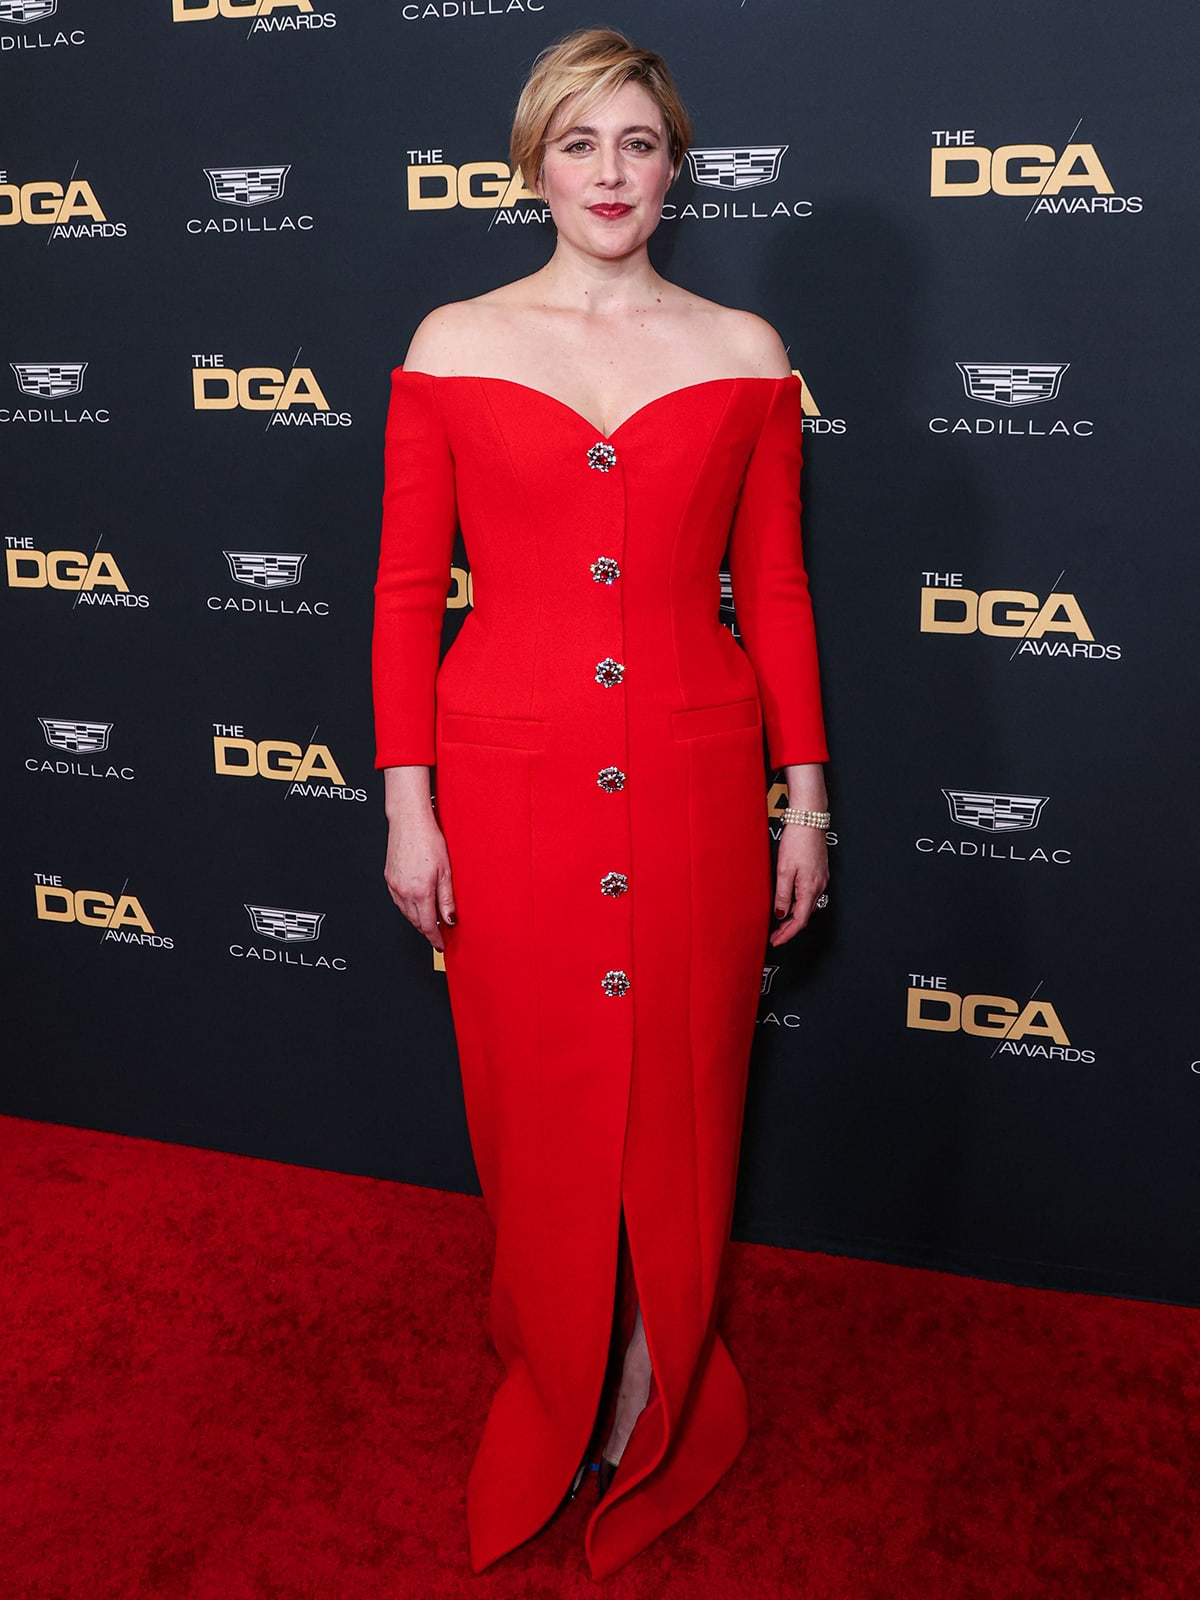 Honored with the DGA Film Feature medallion, Greta looks stunning in her red gown with silver pointed-toe pumps and a three-strand pearl bracelet